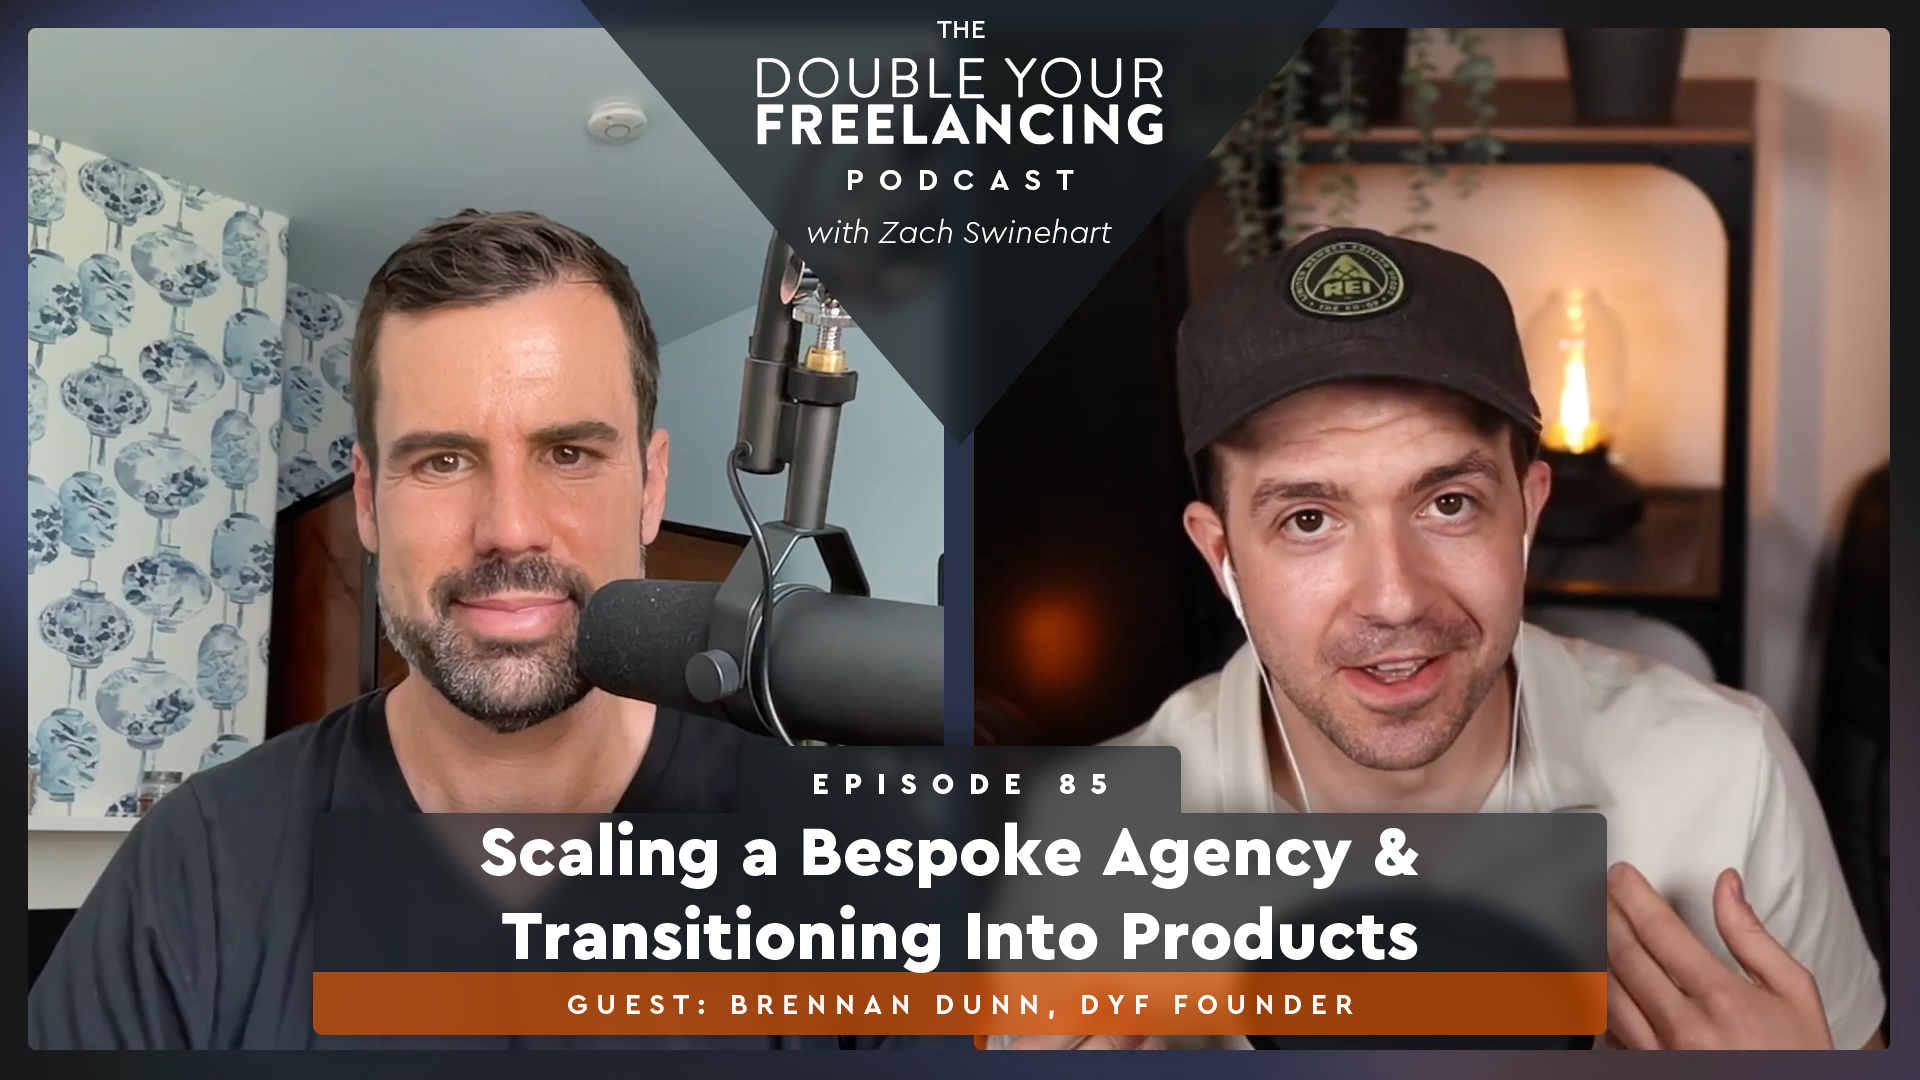 Episode 85: Scaling a Bespoke Agency & Transitioning Into Products, With Brennan Dunn